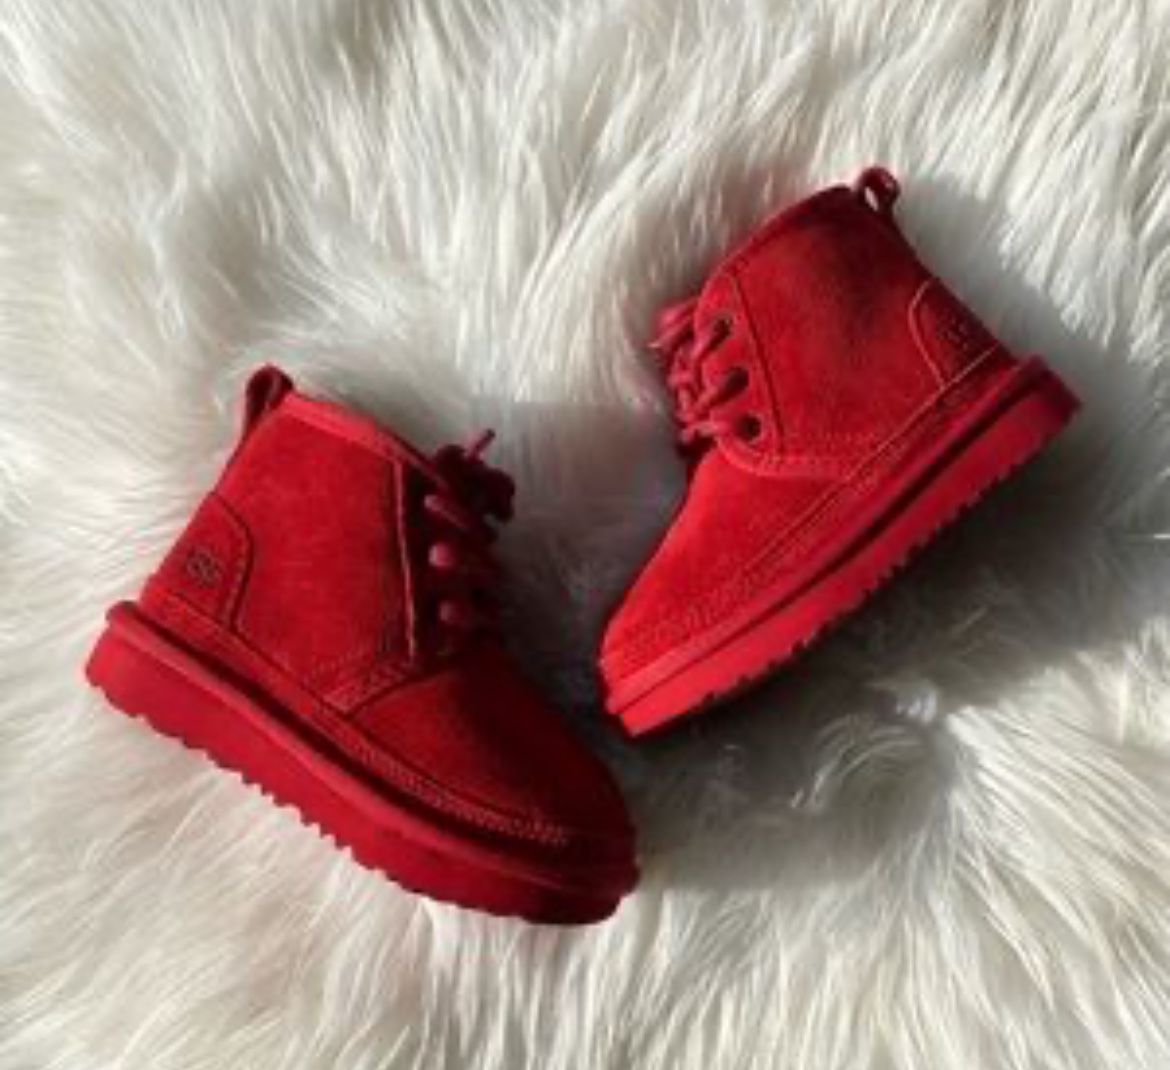  UGG Boots Plush Red Toddler Booties